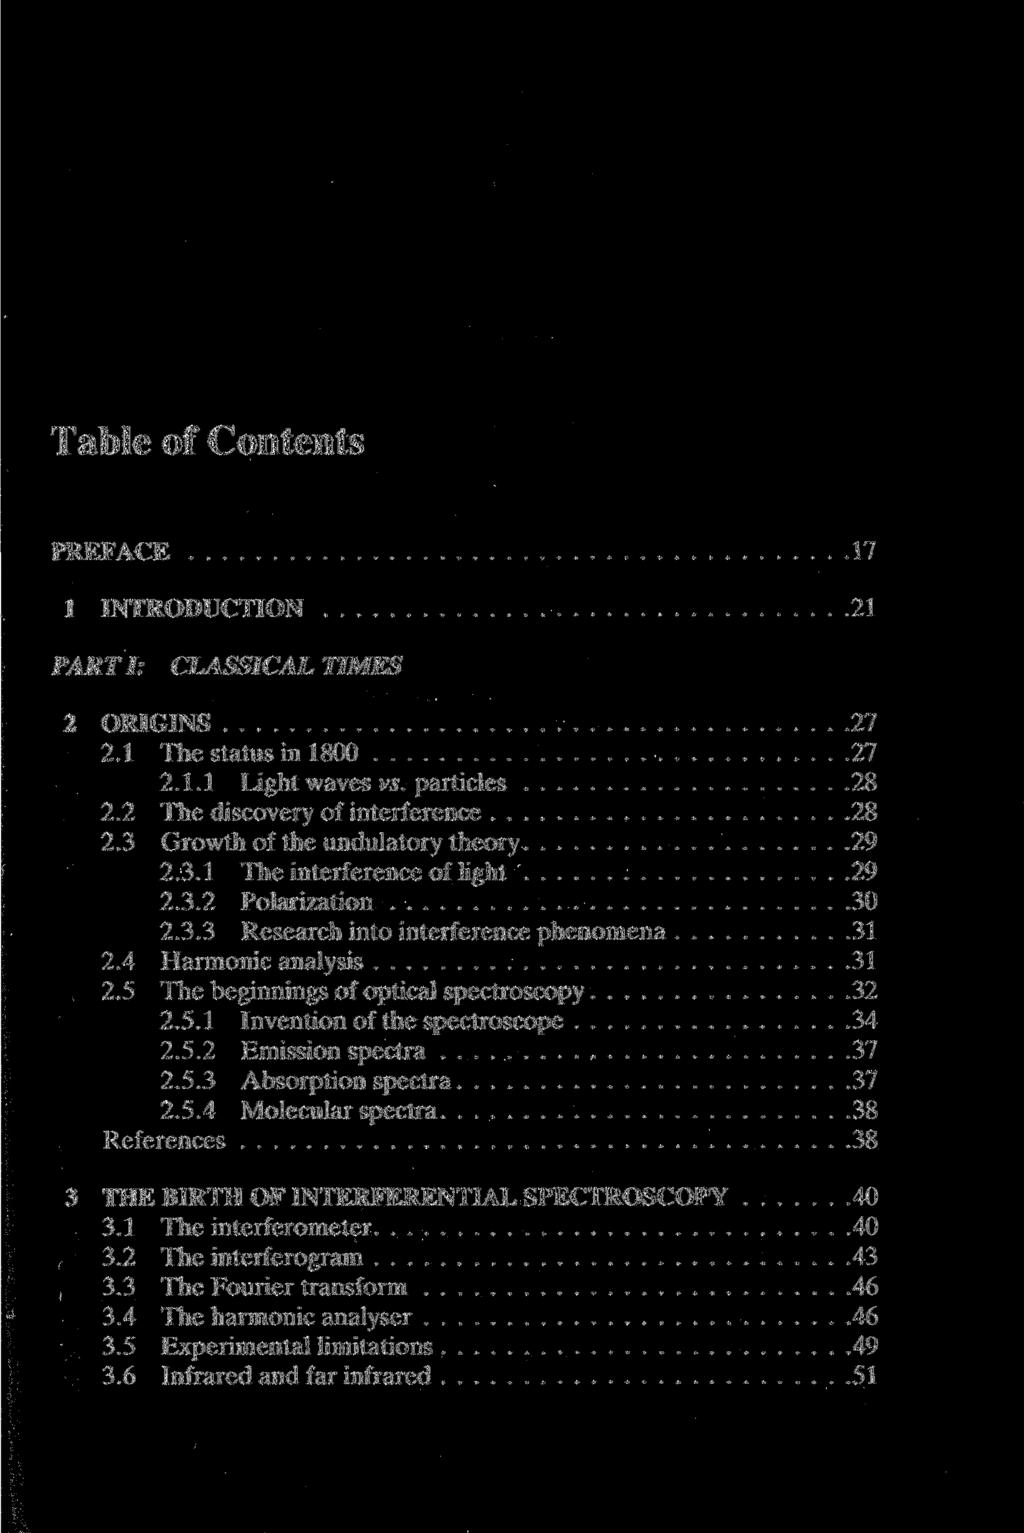 Table of Contents PREFACE 17 1 INTRODUCTION 21 PARTI: CLASSICAL TIMES 2 ORIGINS 27 2.1 The Status in 1800 27 2.1.1 Light waves vs. particles 28 2.2 The discovery of interference 28 2.